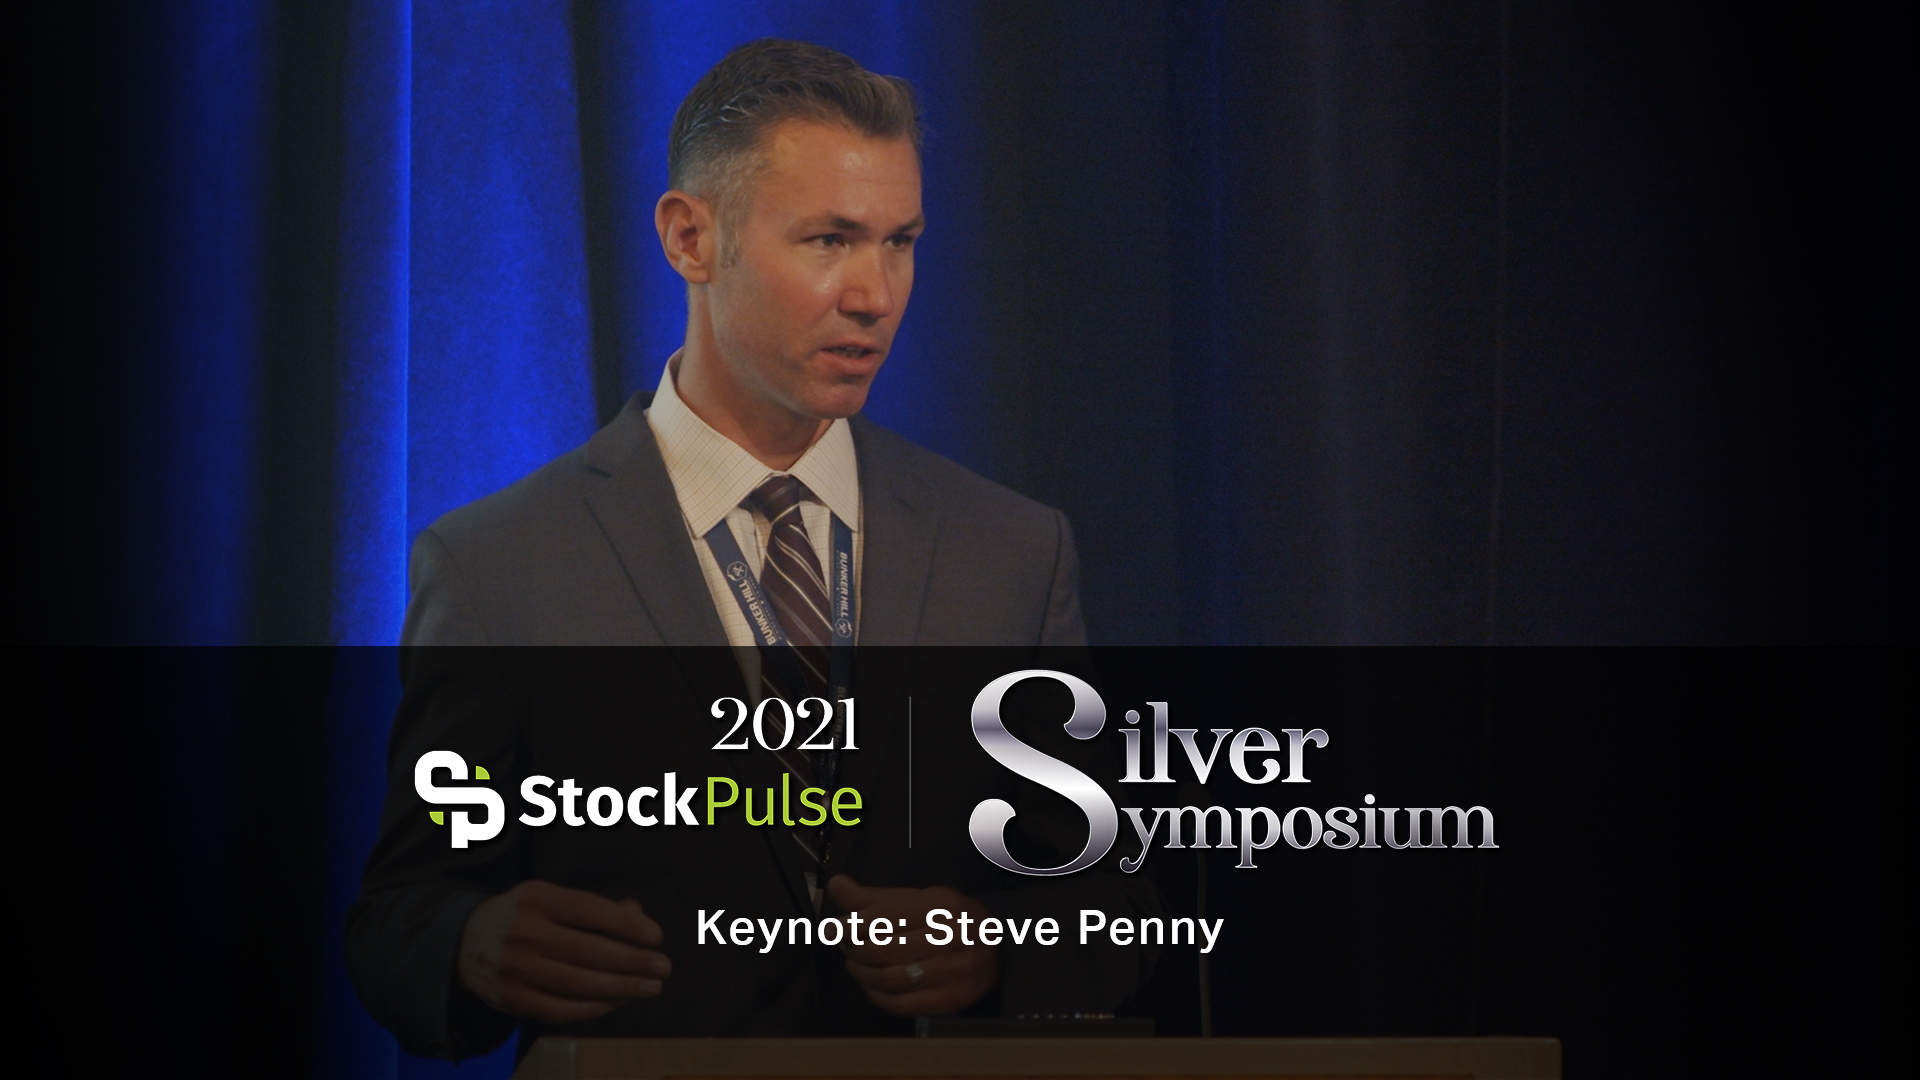 Keynote Steve Penny | How Silver Could Outperform Equities By a FACTOR OF 50